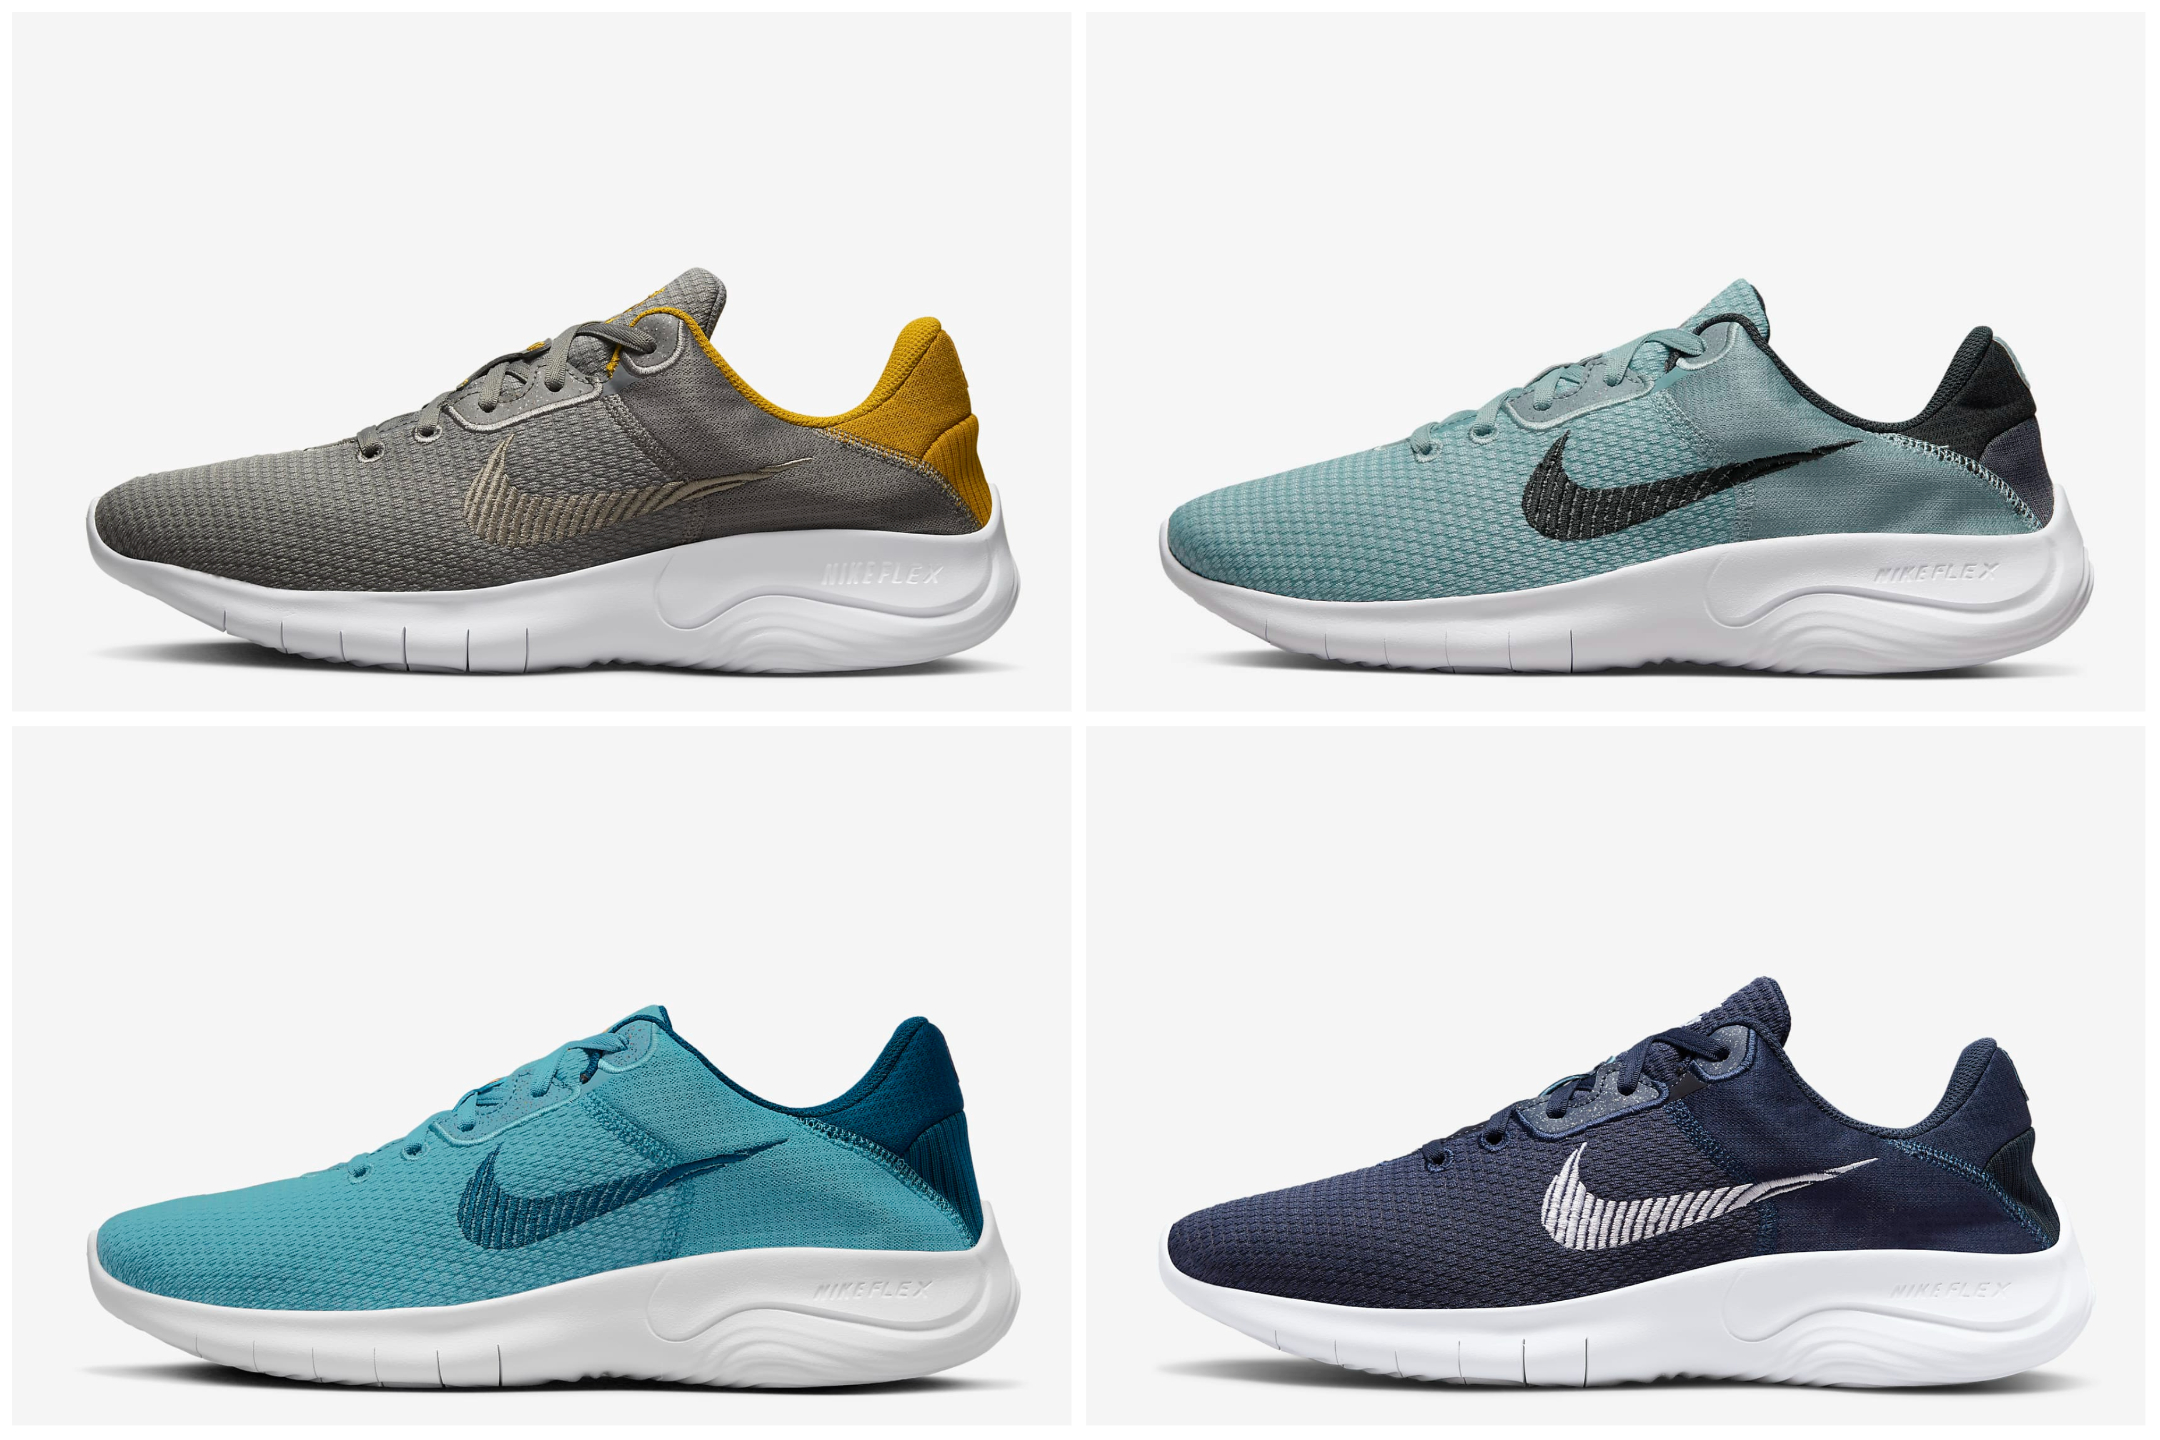 You Can Buy Pair Of Rated Nike Running Right Now For Under $50 - BroBible